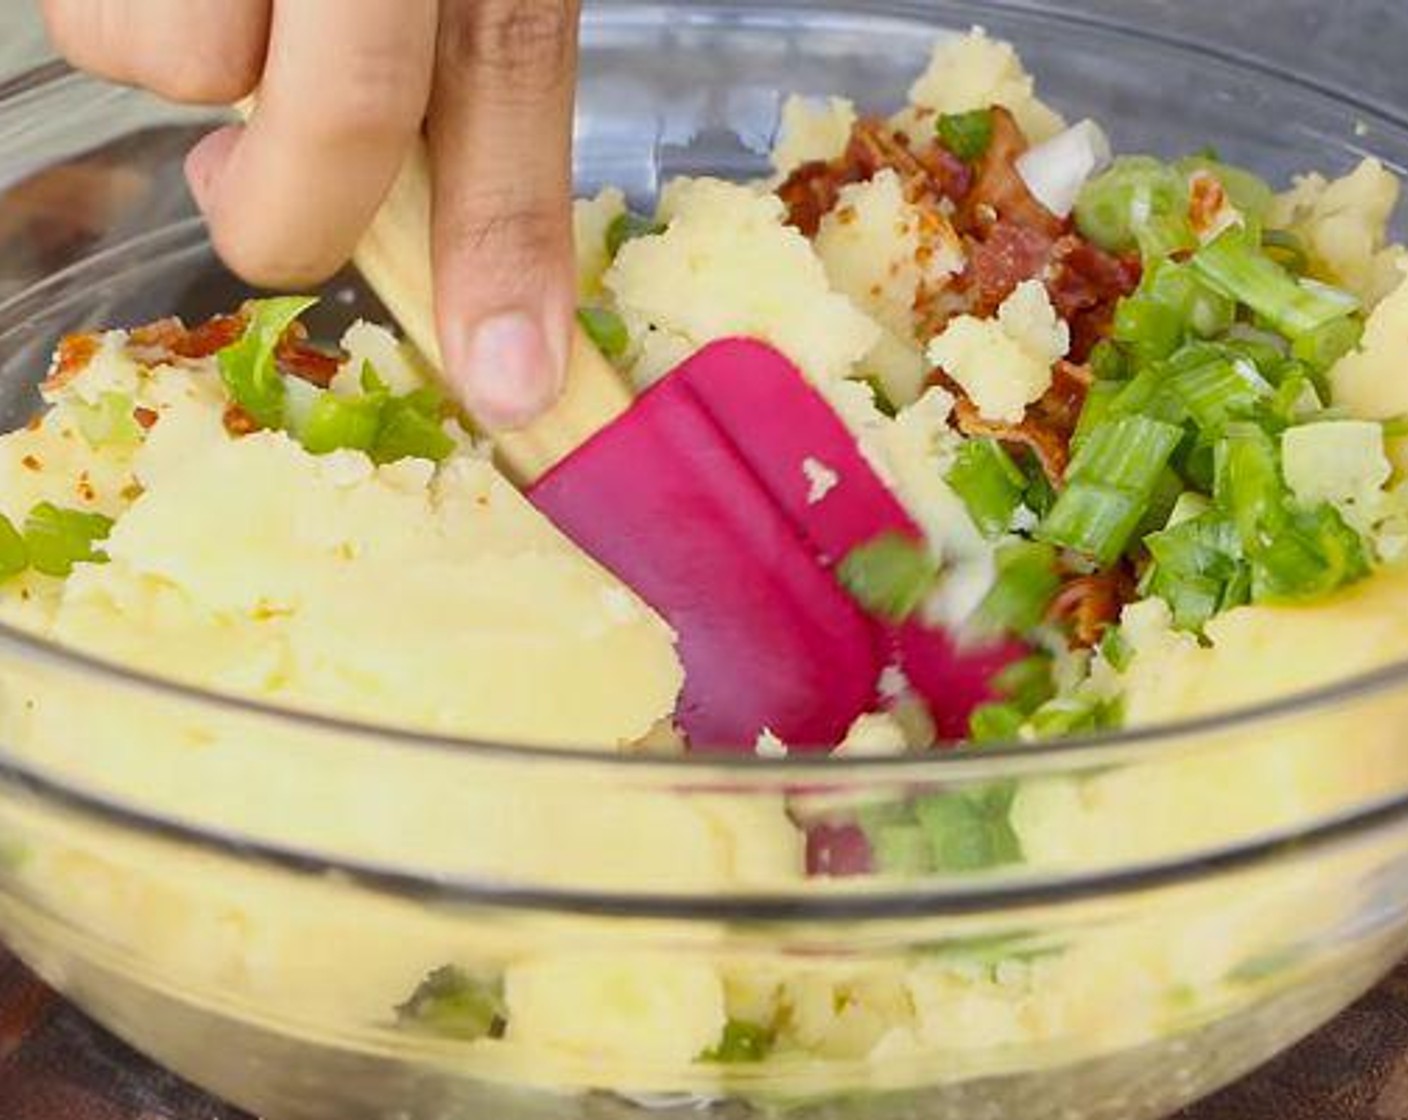 step 2 In a bowl, add Mashed Potatoes (4 cups), Salt (to taste), chopped bacon, Scallion (1/2 cup) and mix together until well incorporated.